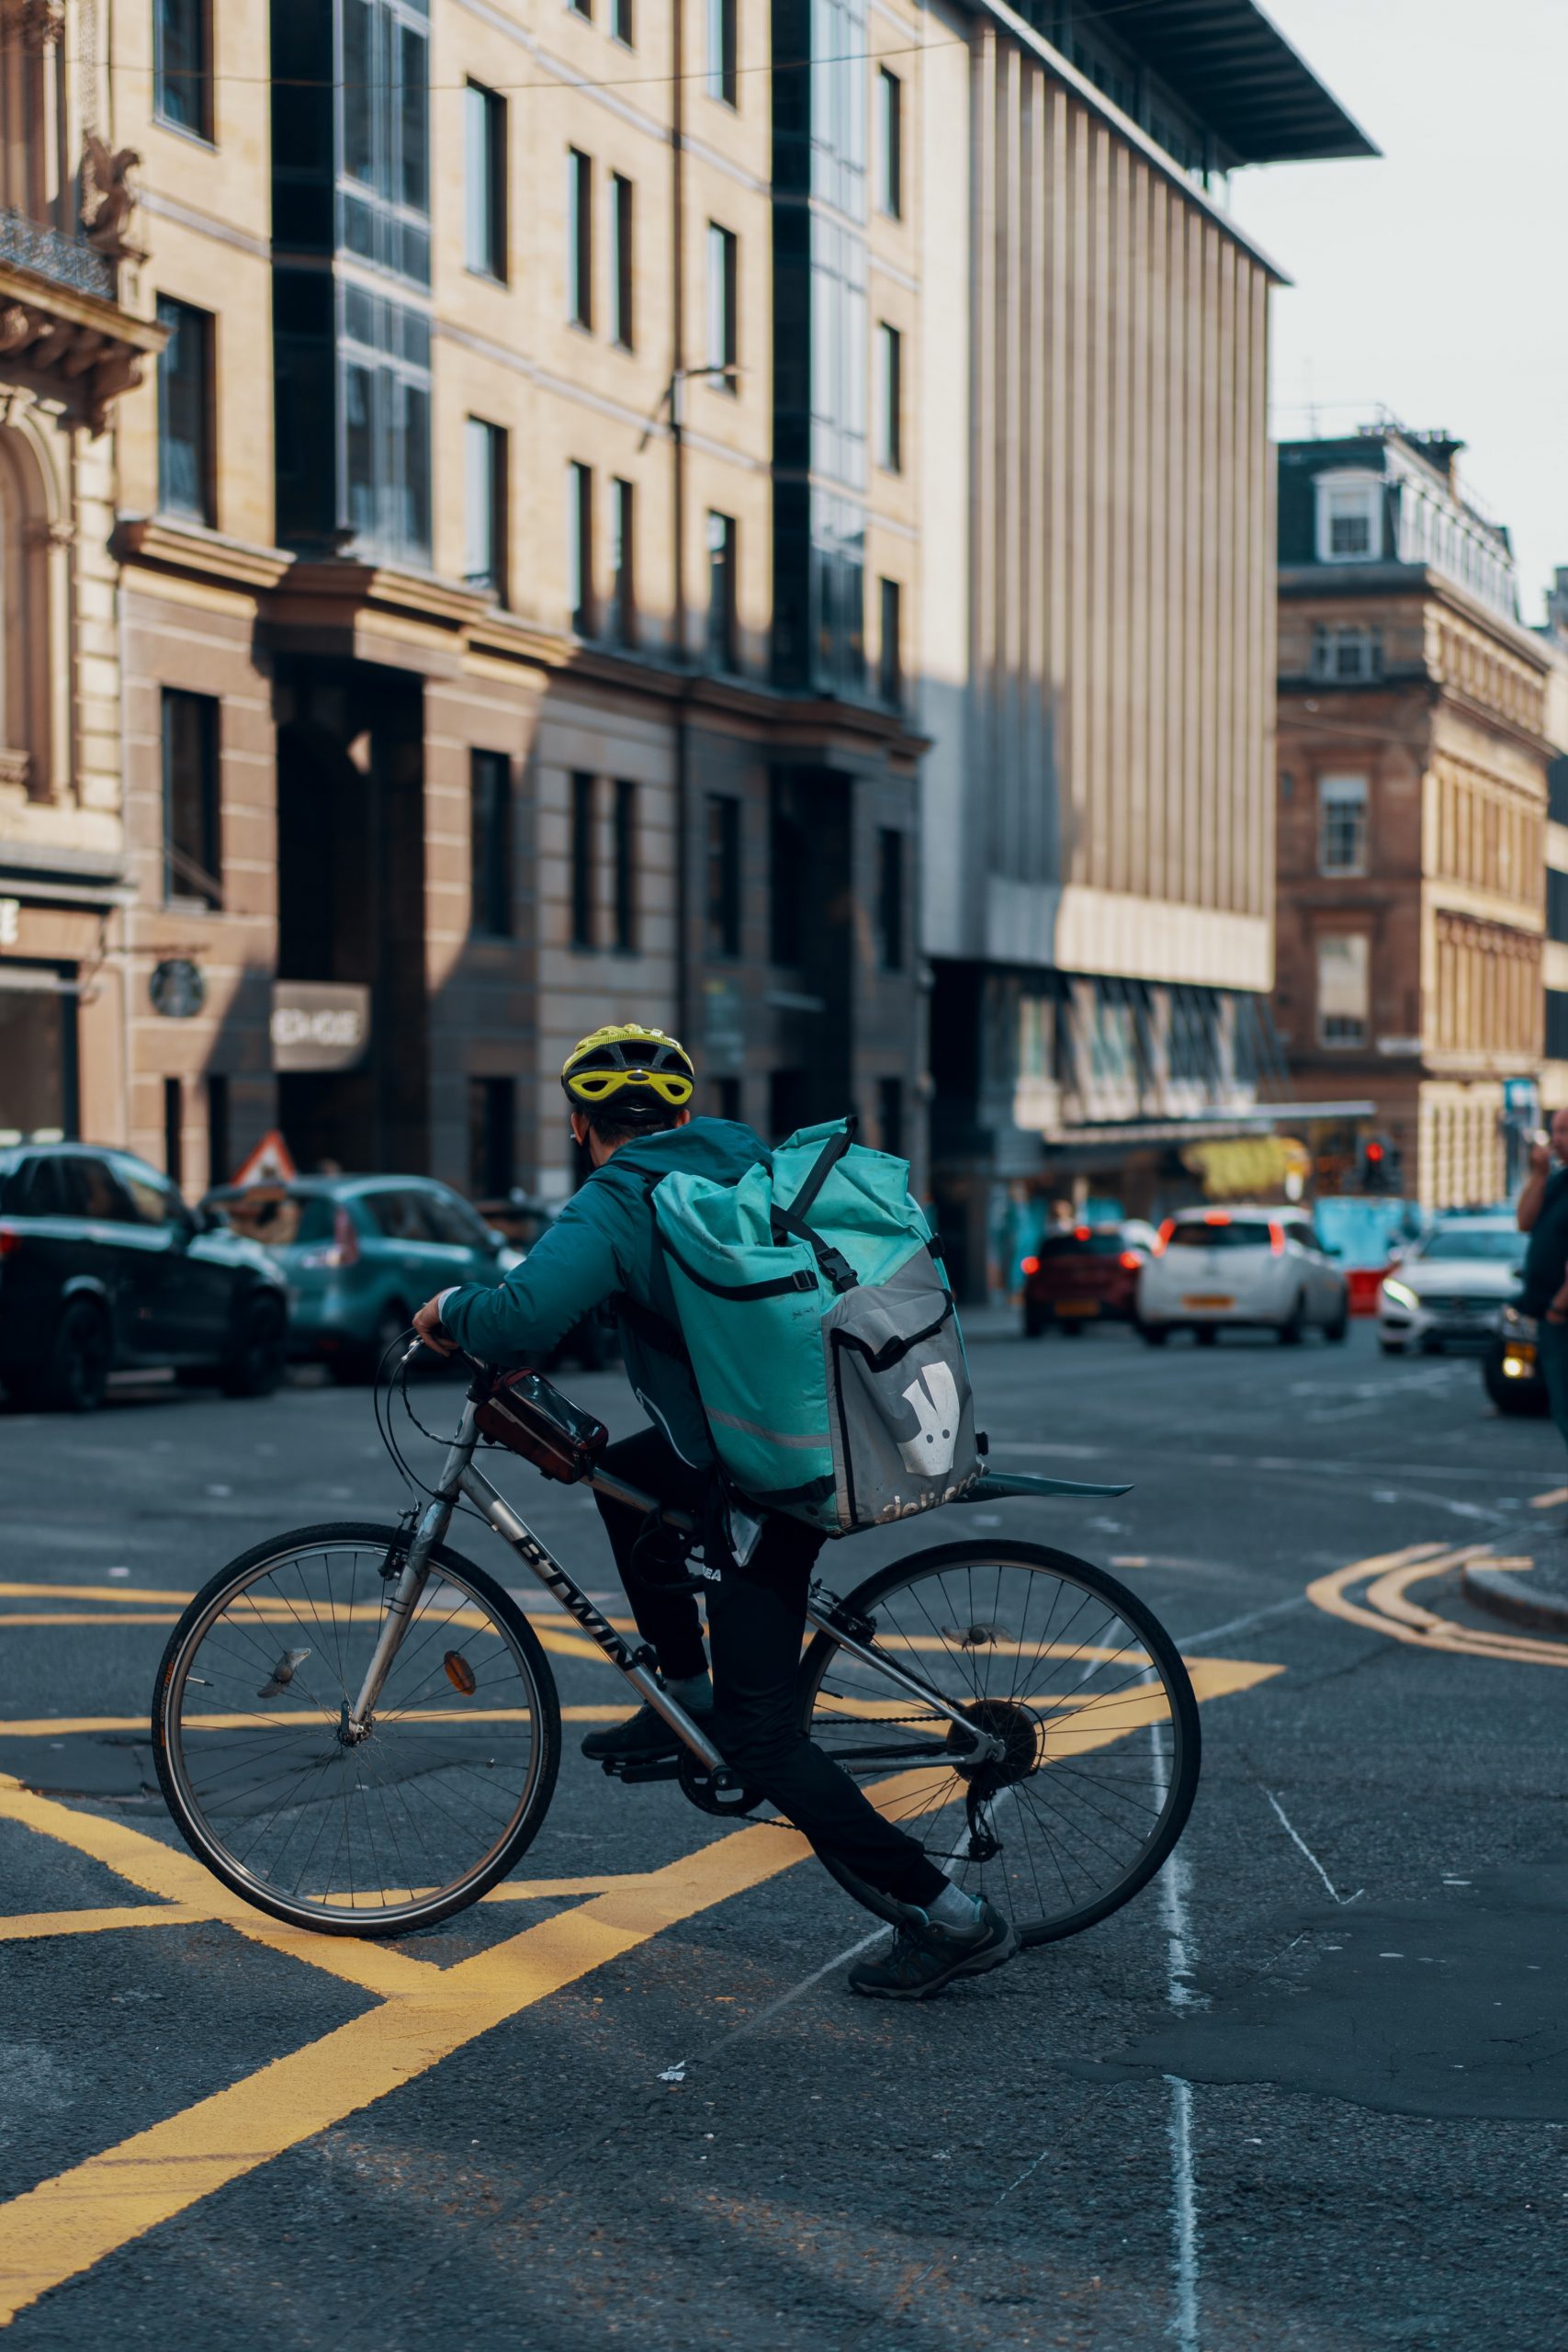 A deliveroo driver riding a bike crosses a road in Glasgow